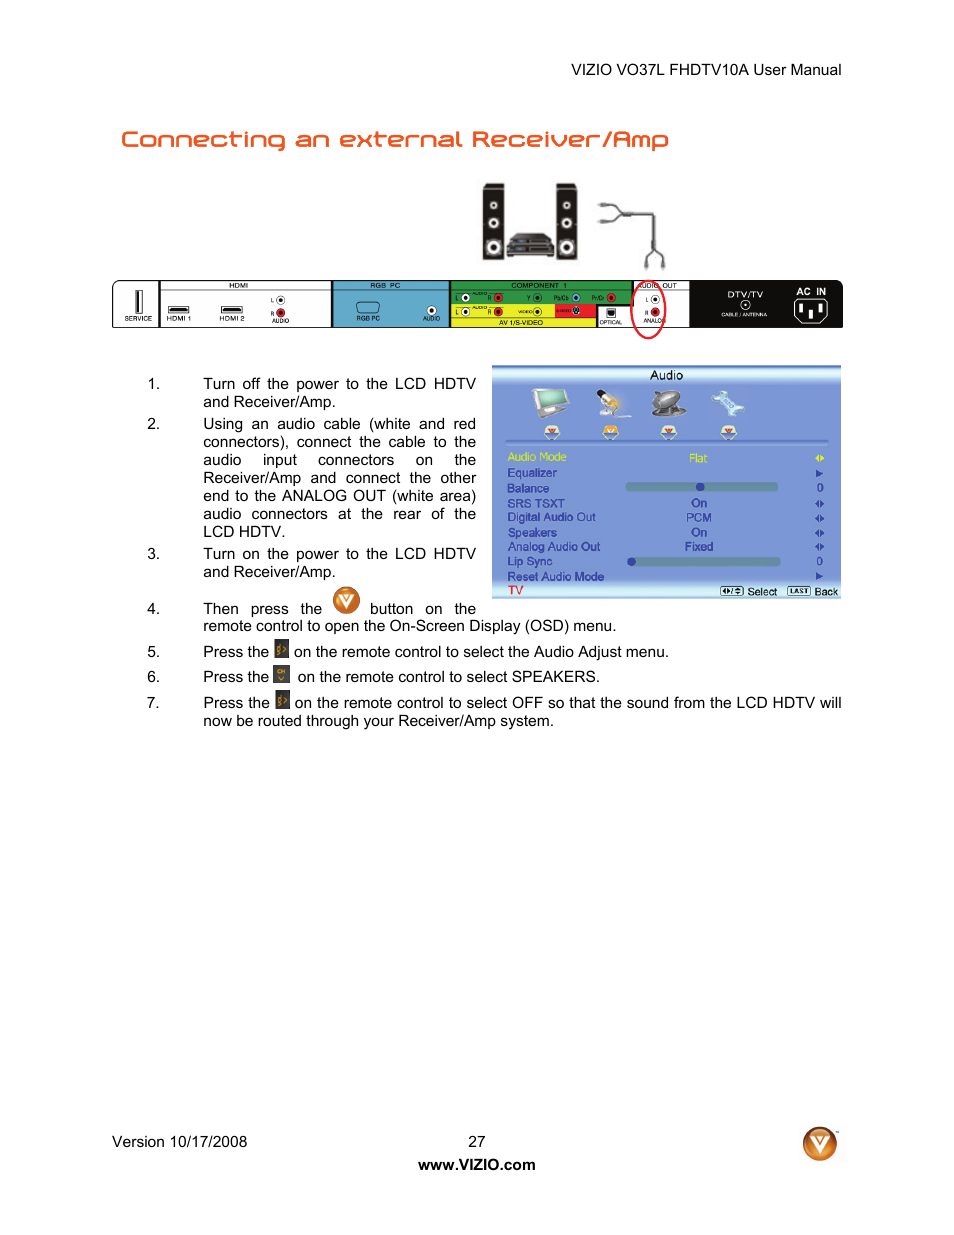 Connecting an external receiver/amp | Vizio VO37L FHDTV10A User Manual | Page 27 / 80